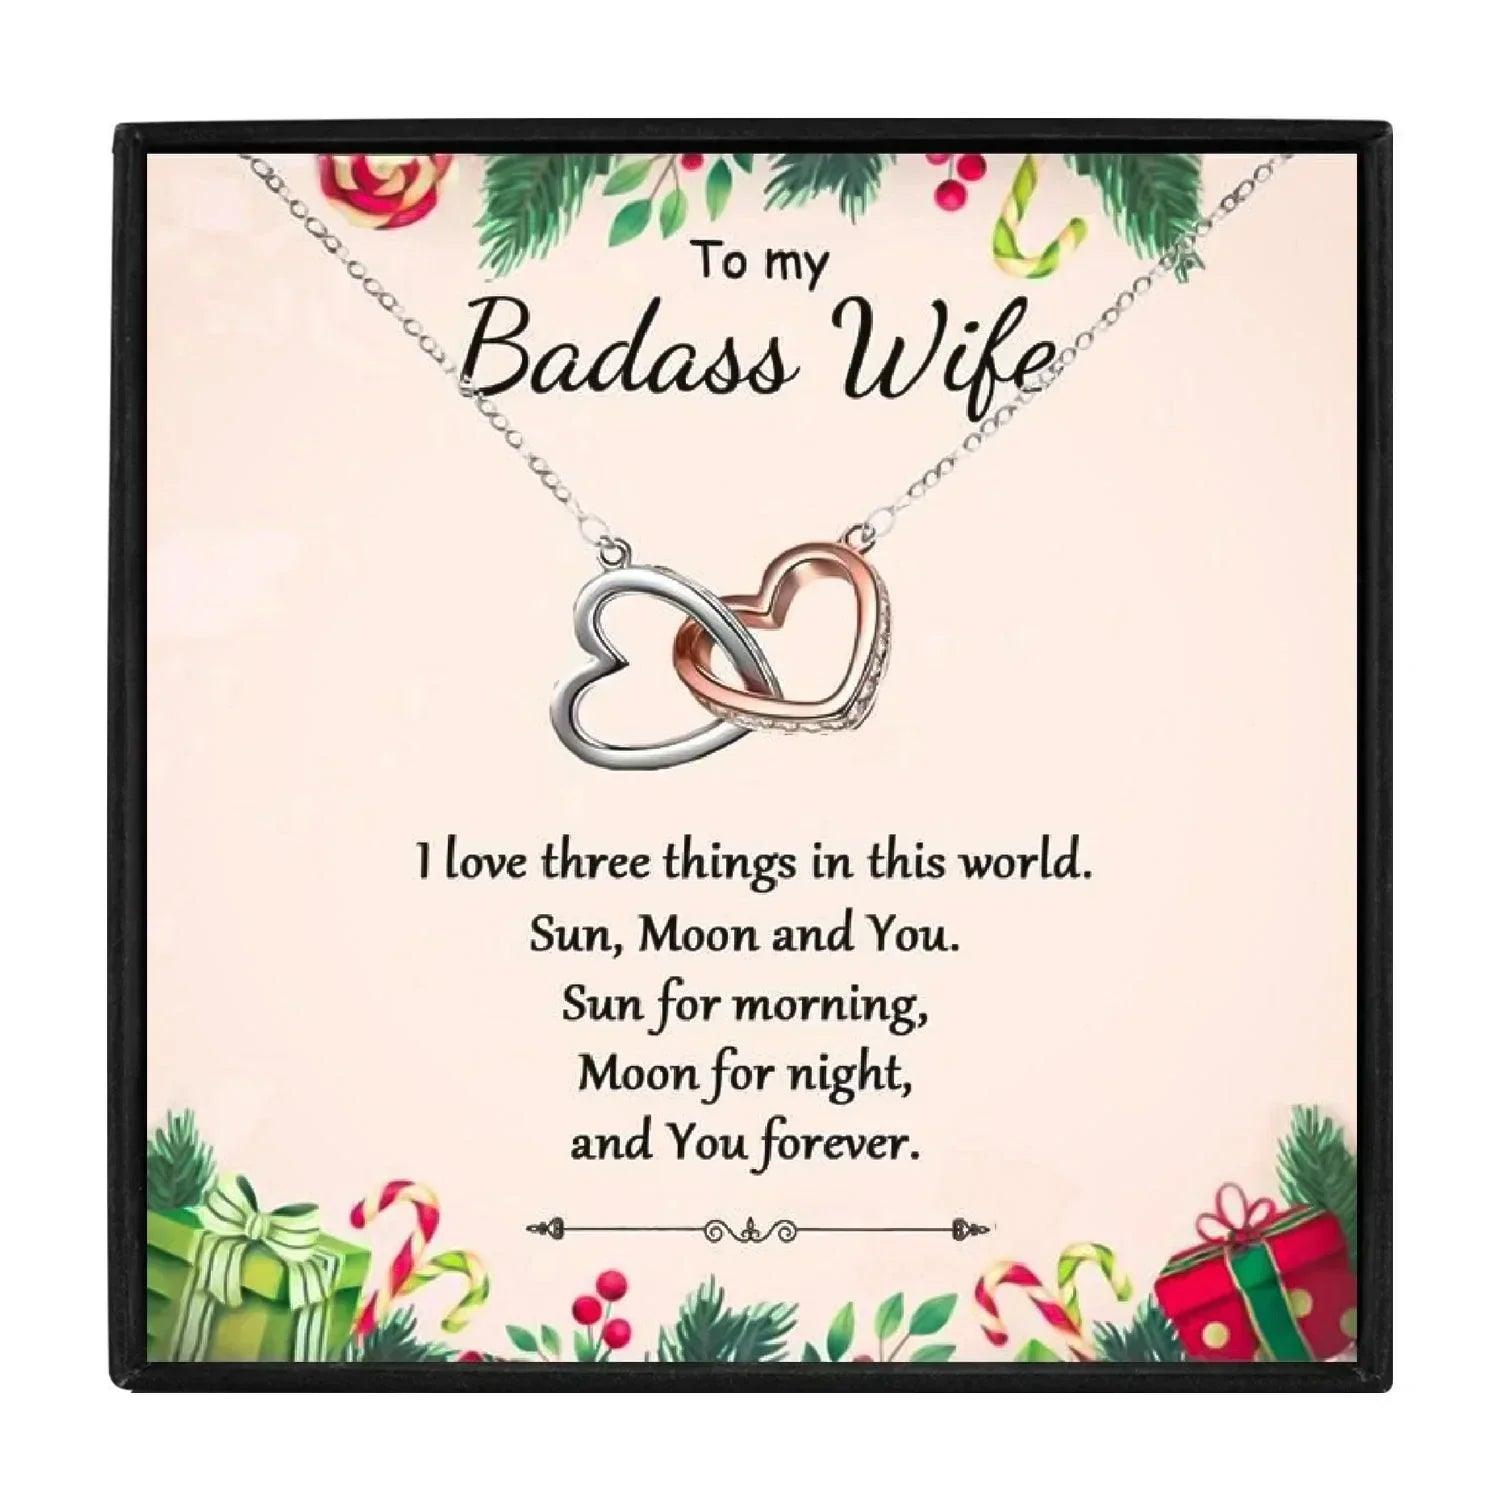 To My Badass Wife Double Heart Necklace Gift Set in 2023 | To My Badass Wife Double Heart Necklace Gift Set - undefined | Badass Wife Double Heart Necklace, wife gift, wife gift ideas | From Hunny Life | hunnylife.com